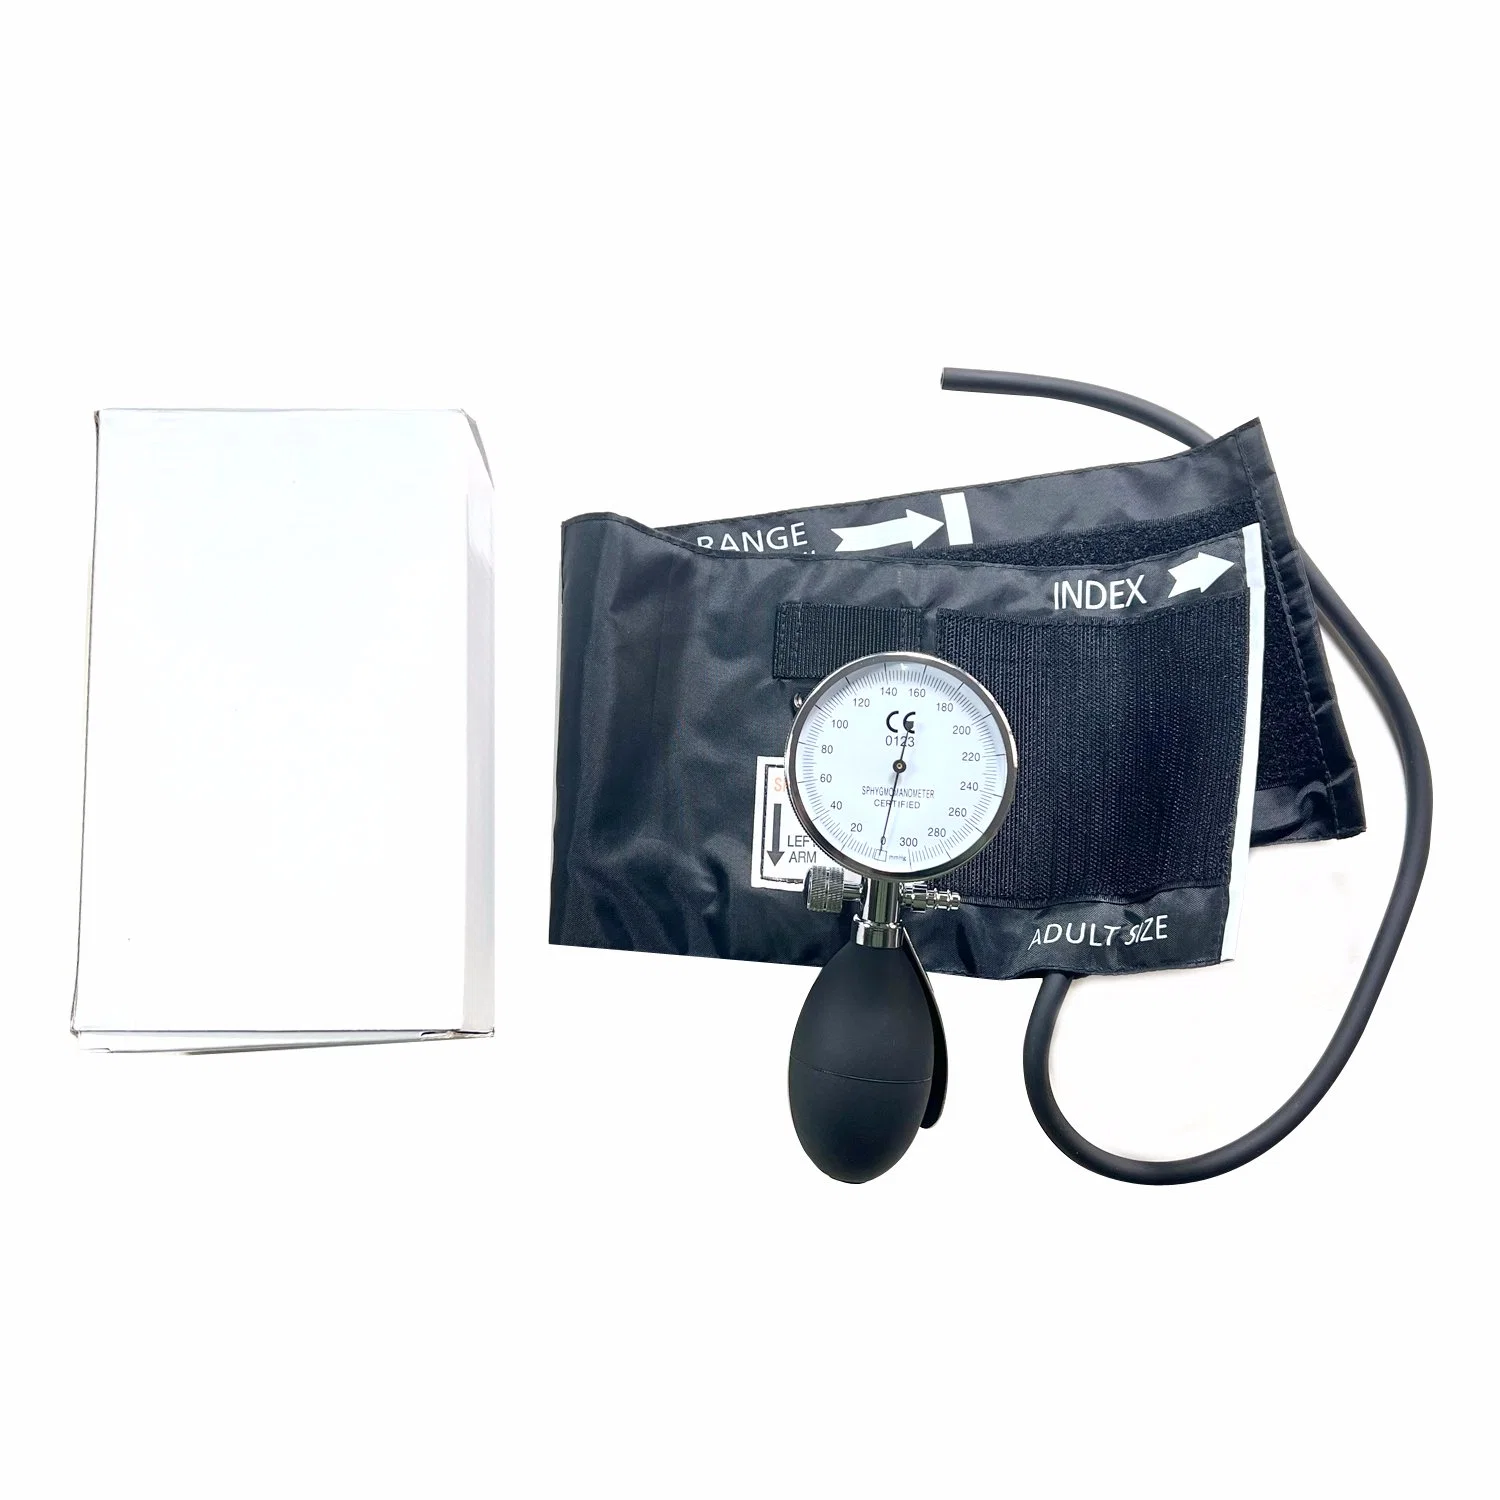 Kt-A11 Professional Blood Pressure Monitor Adult Deluxe Aneroid Palm Type Sphygmomanometer Single Tube Double Tube Sphygmomanometer